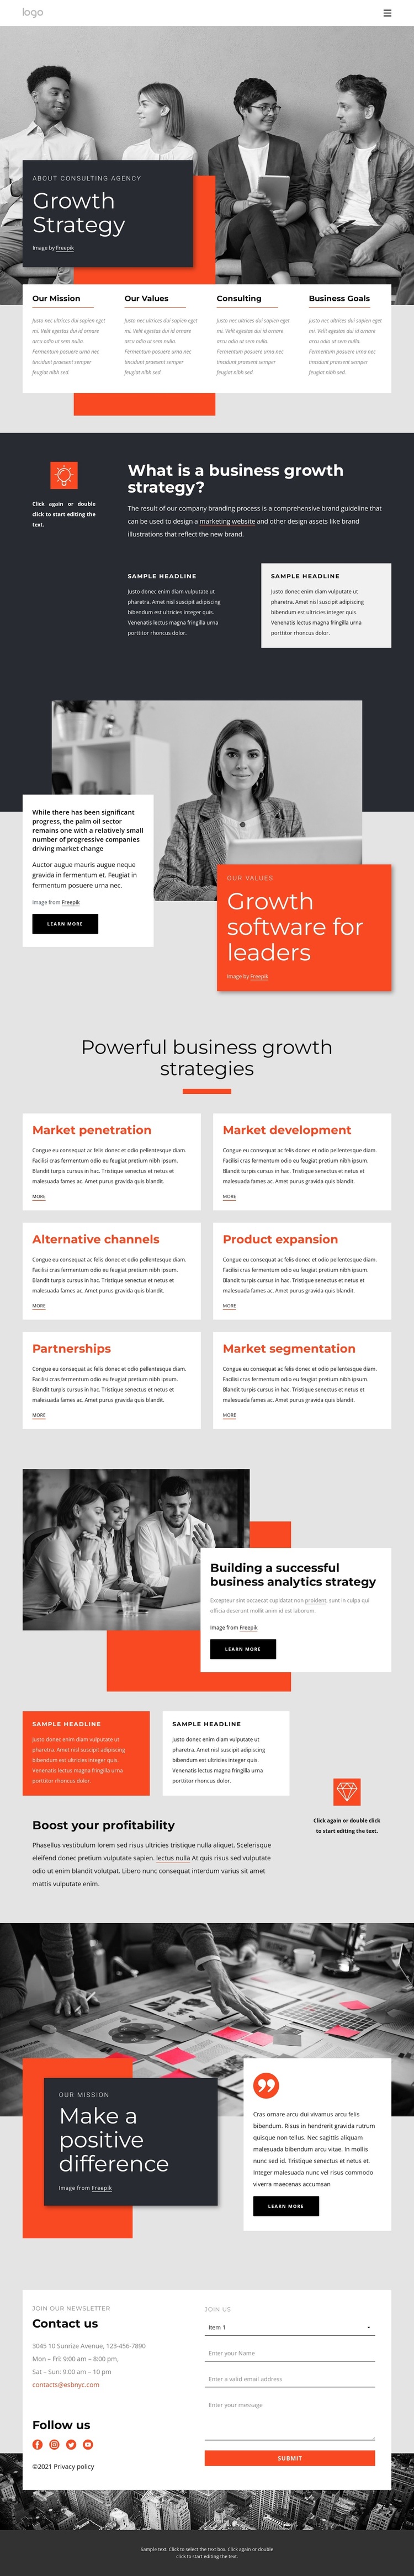 Growth strategy consultants Template